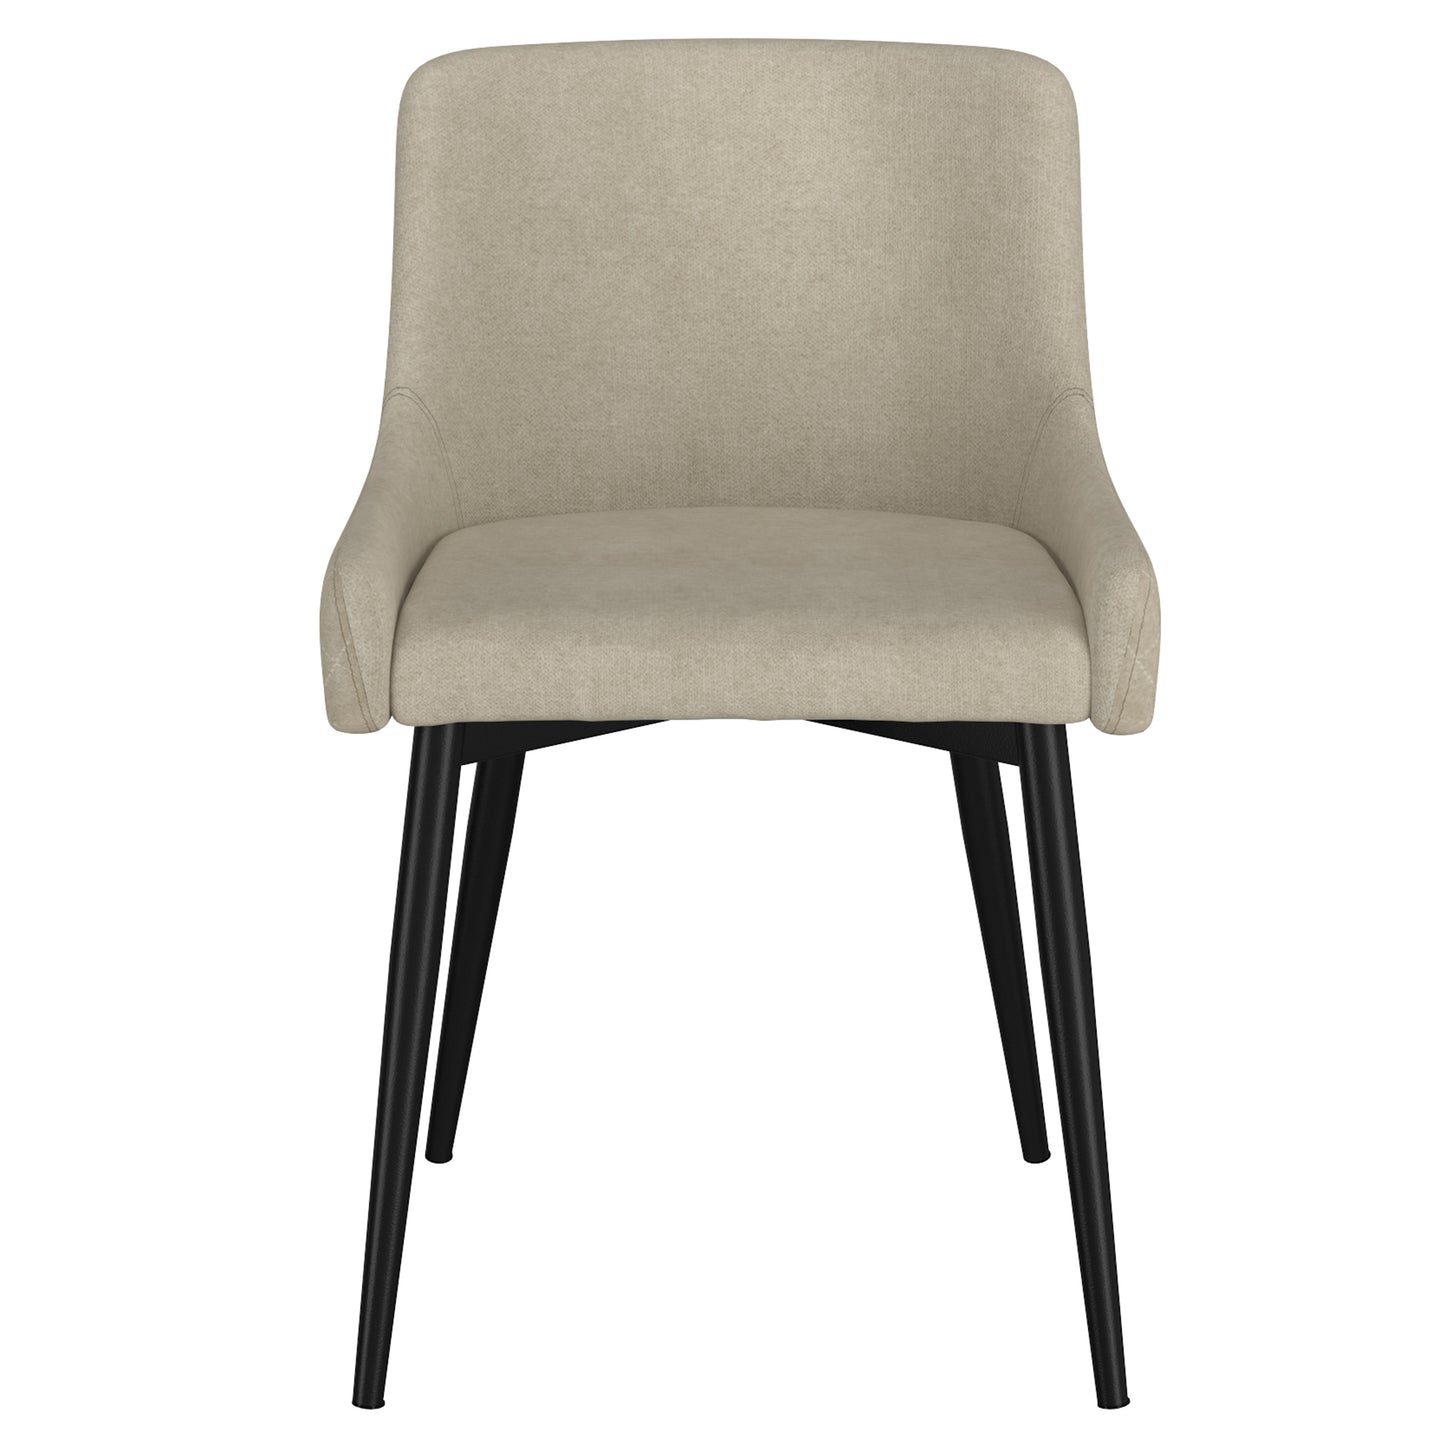 Bianca Side Chair, Set of 2 in Beige and Black Leg